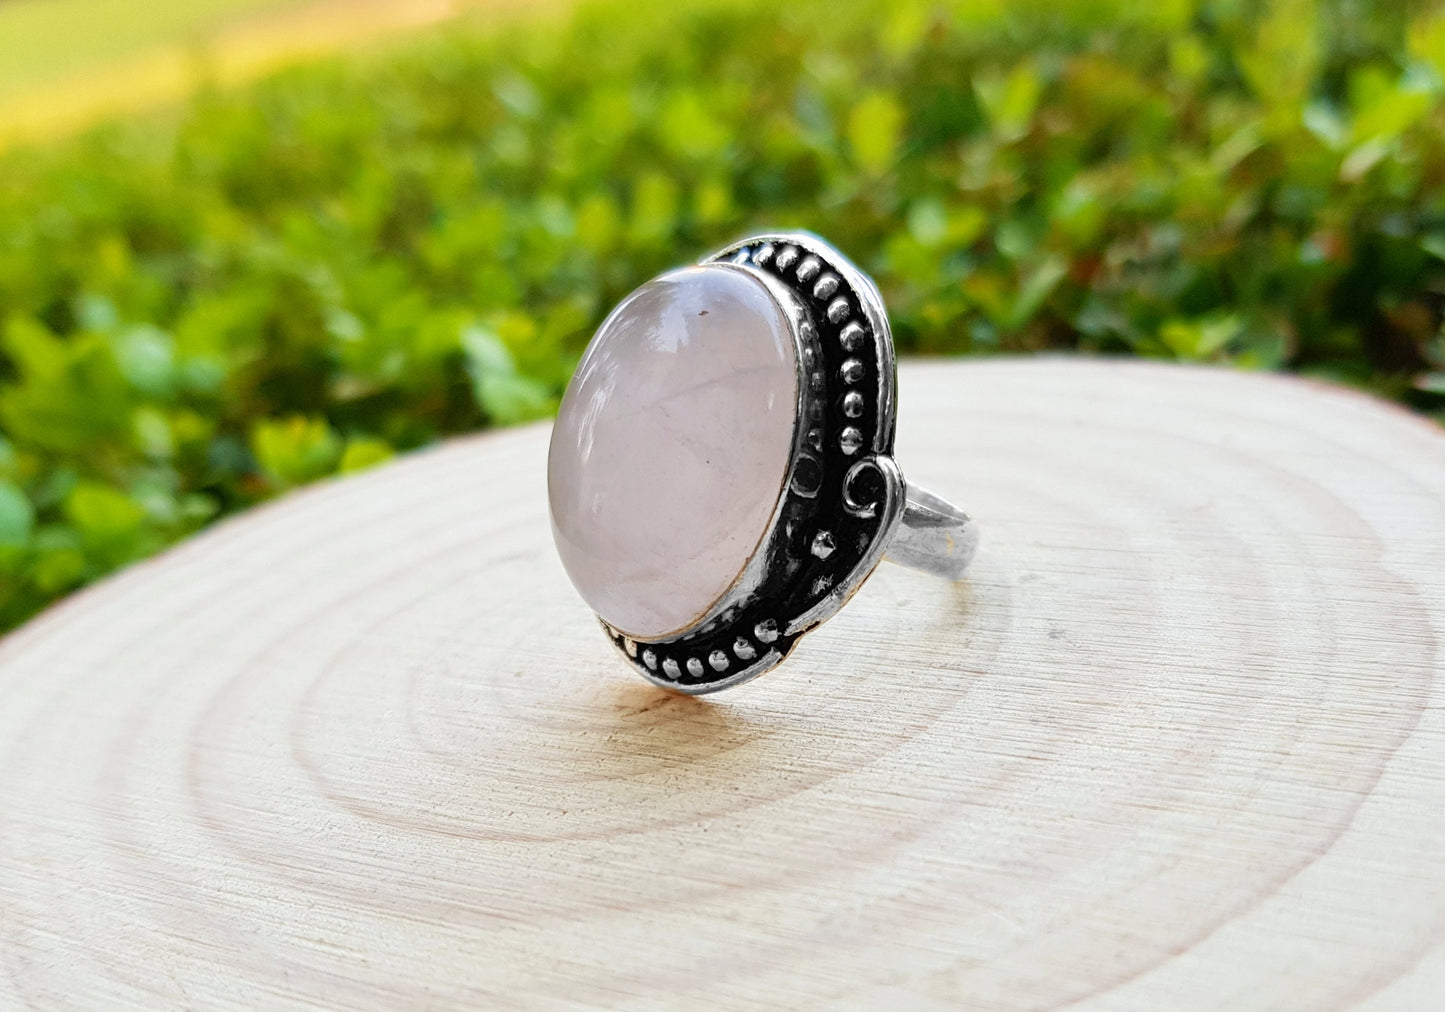 Pink Rose Quartz Gemstone Ring In Sterling Silver Size US 7 Big Statement Ring Boho Rings Square Ring Unique Gift For Her